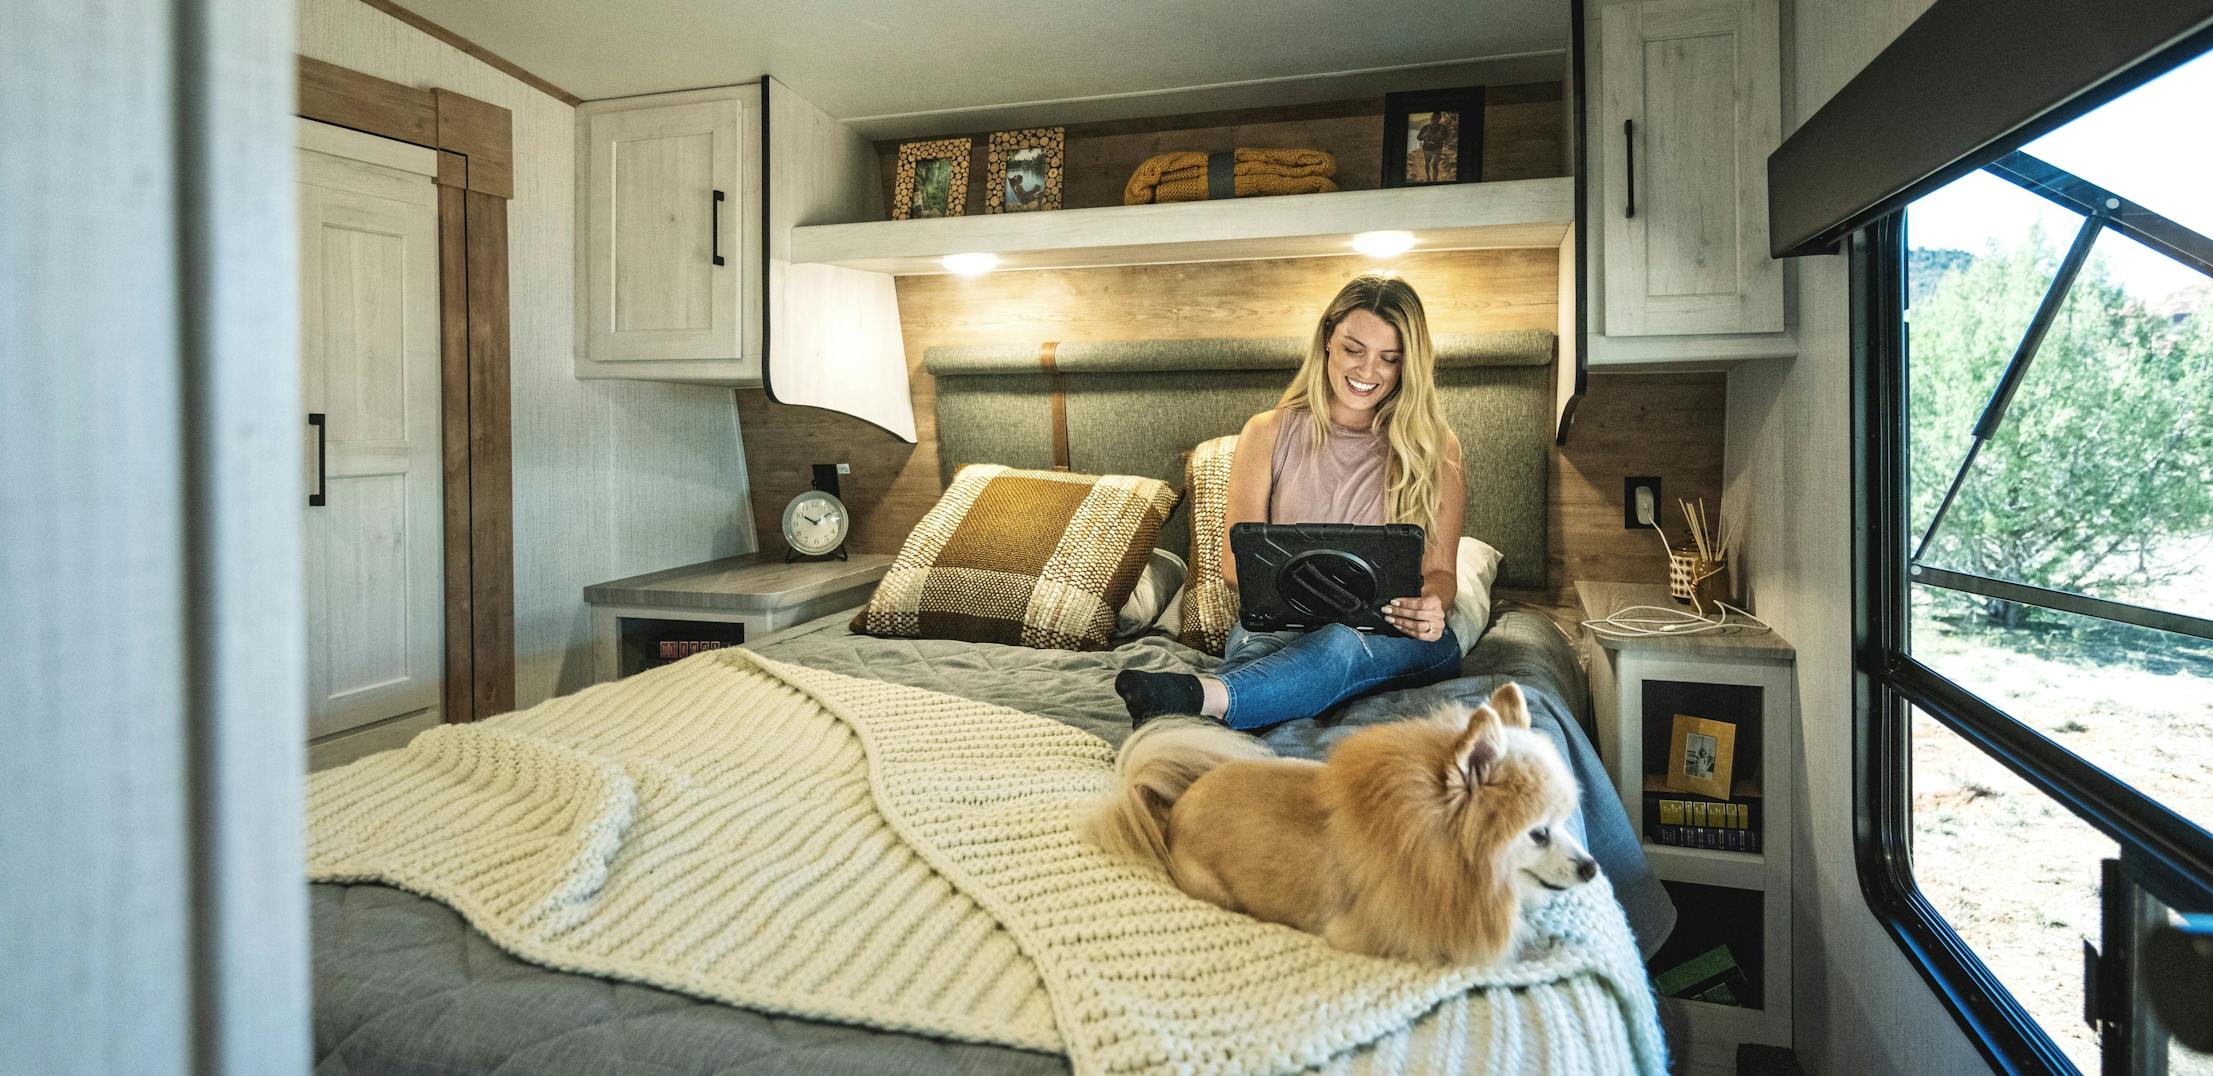 A woman on an Ipad sitting on a bed in a heartland Milestone fifth wheel